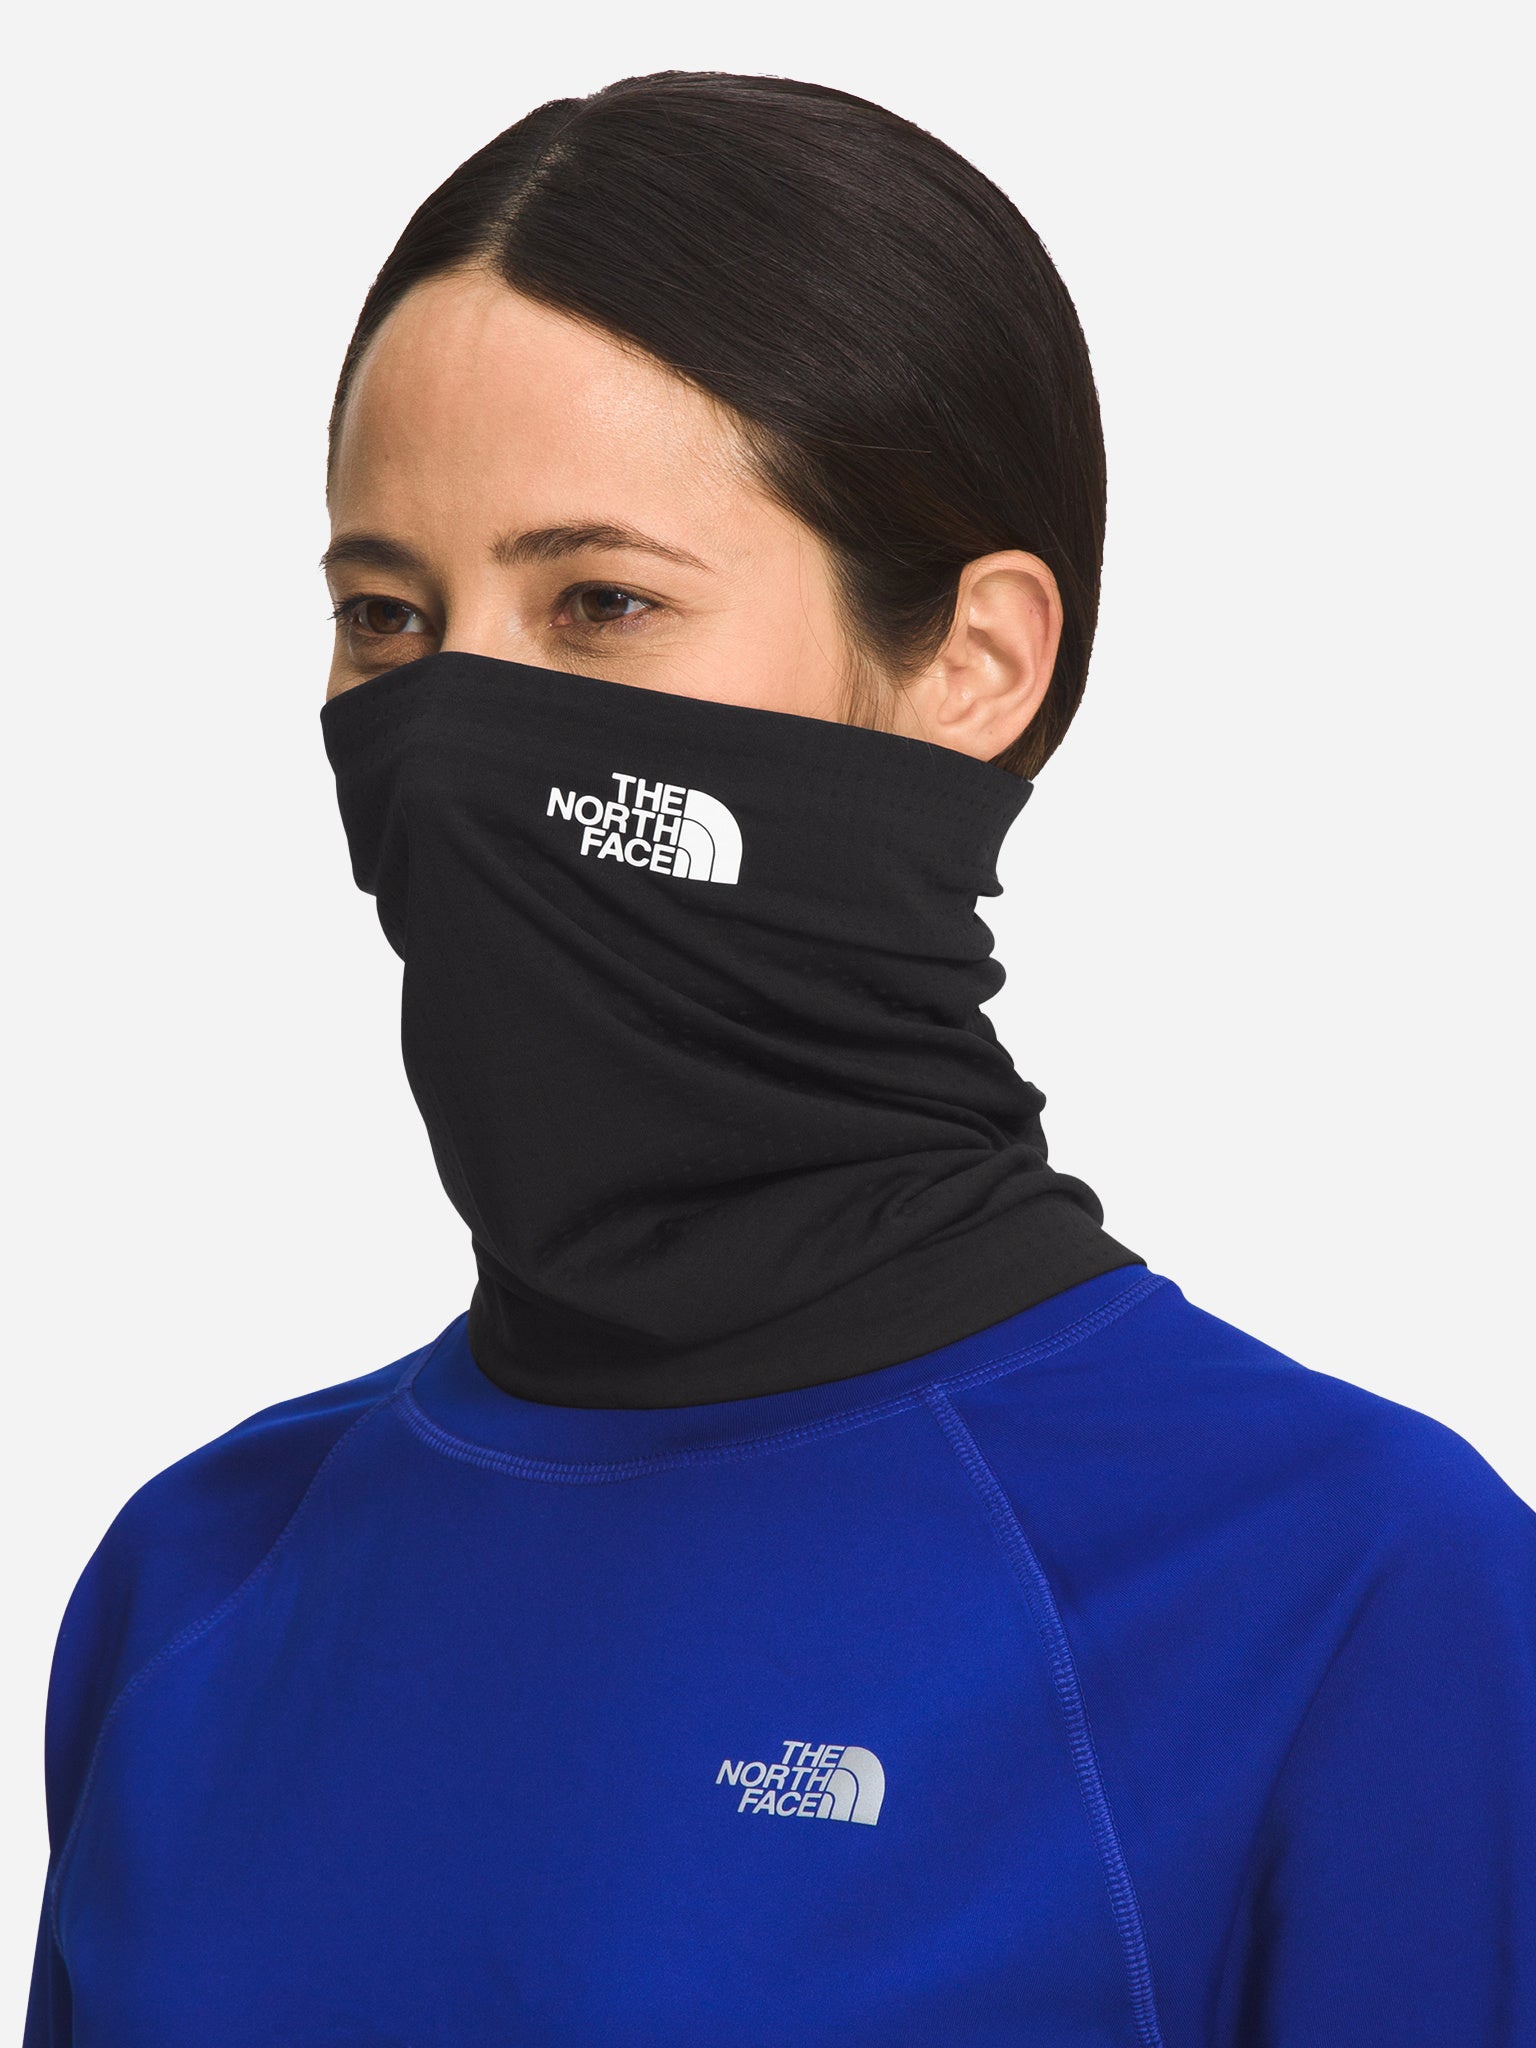 The North Face Fastech Neck Warmer (Unisex)  Outdoor stores, sports,  cycling, skiing, climbing